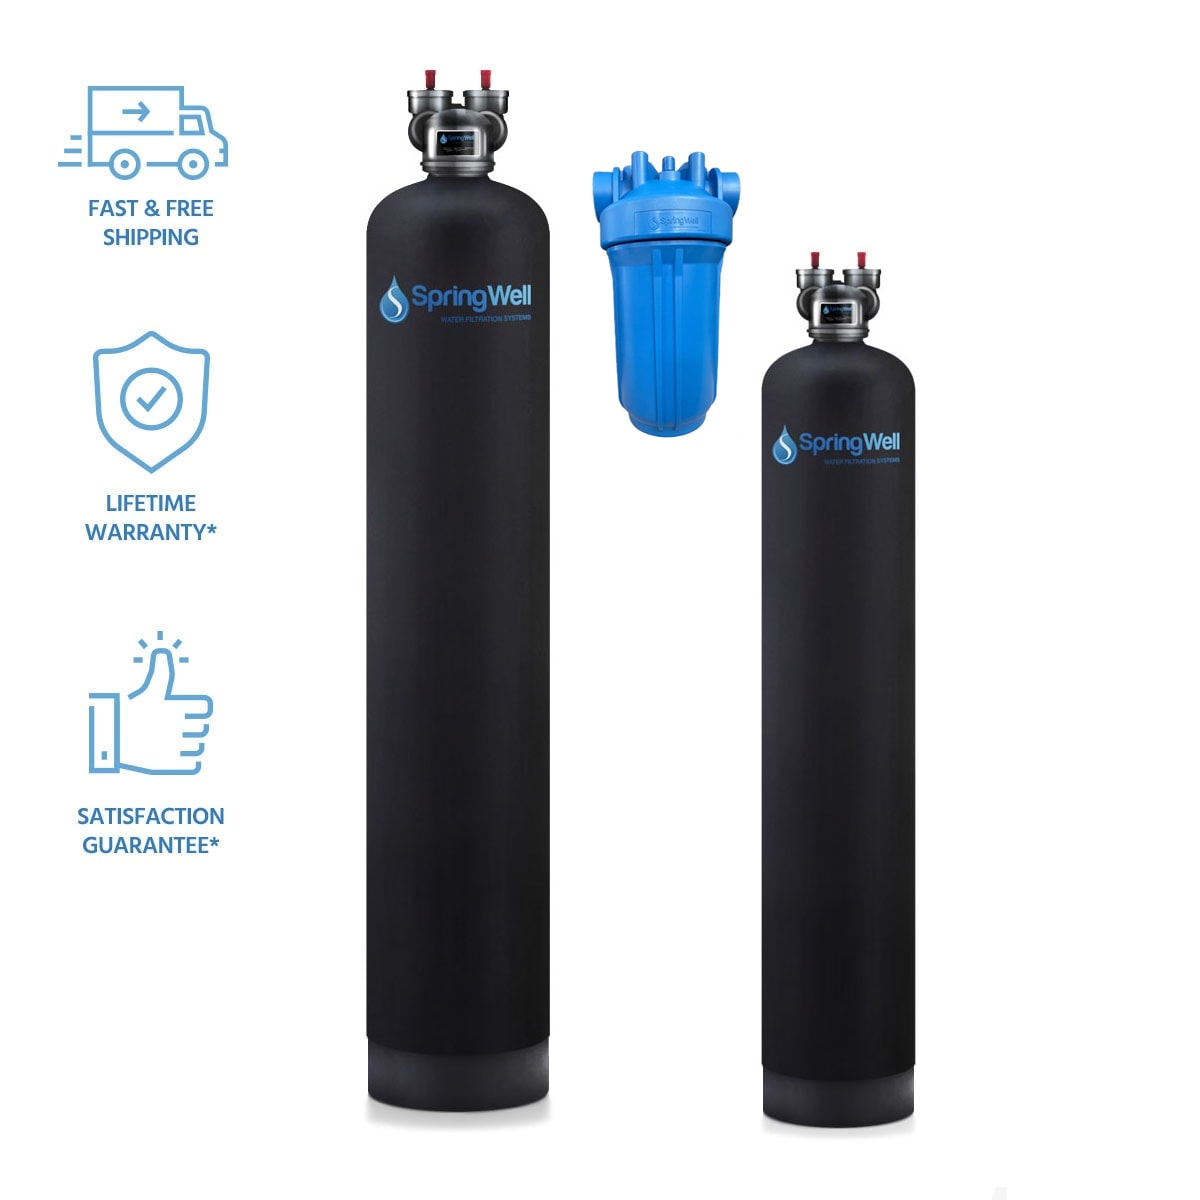 Why you Need a Properly Functioning Water Filter in Your Plumbing